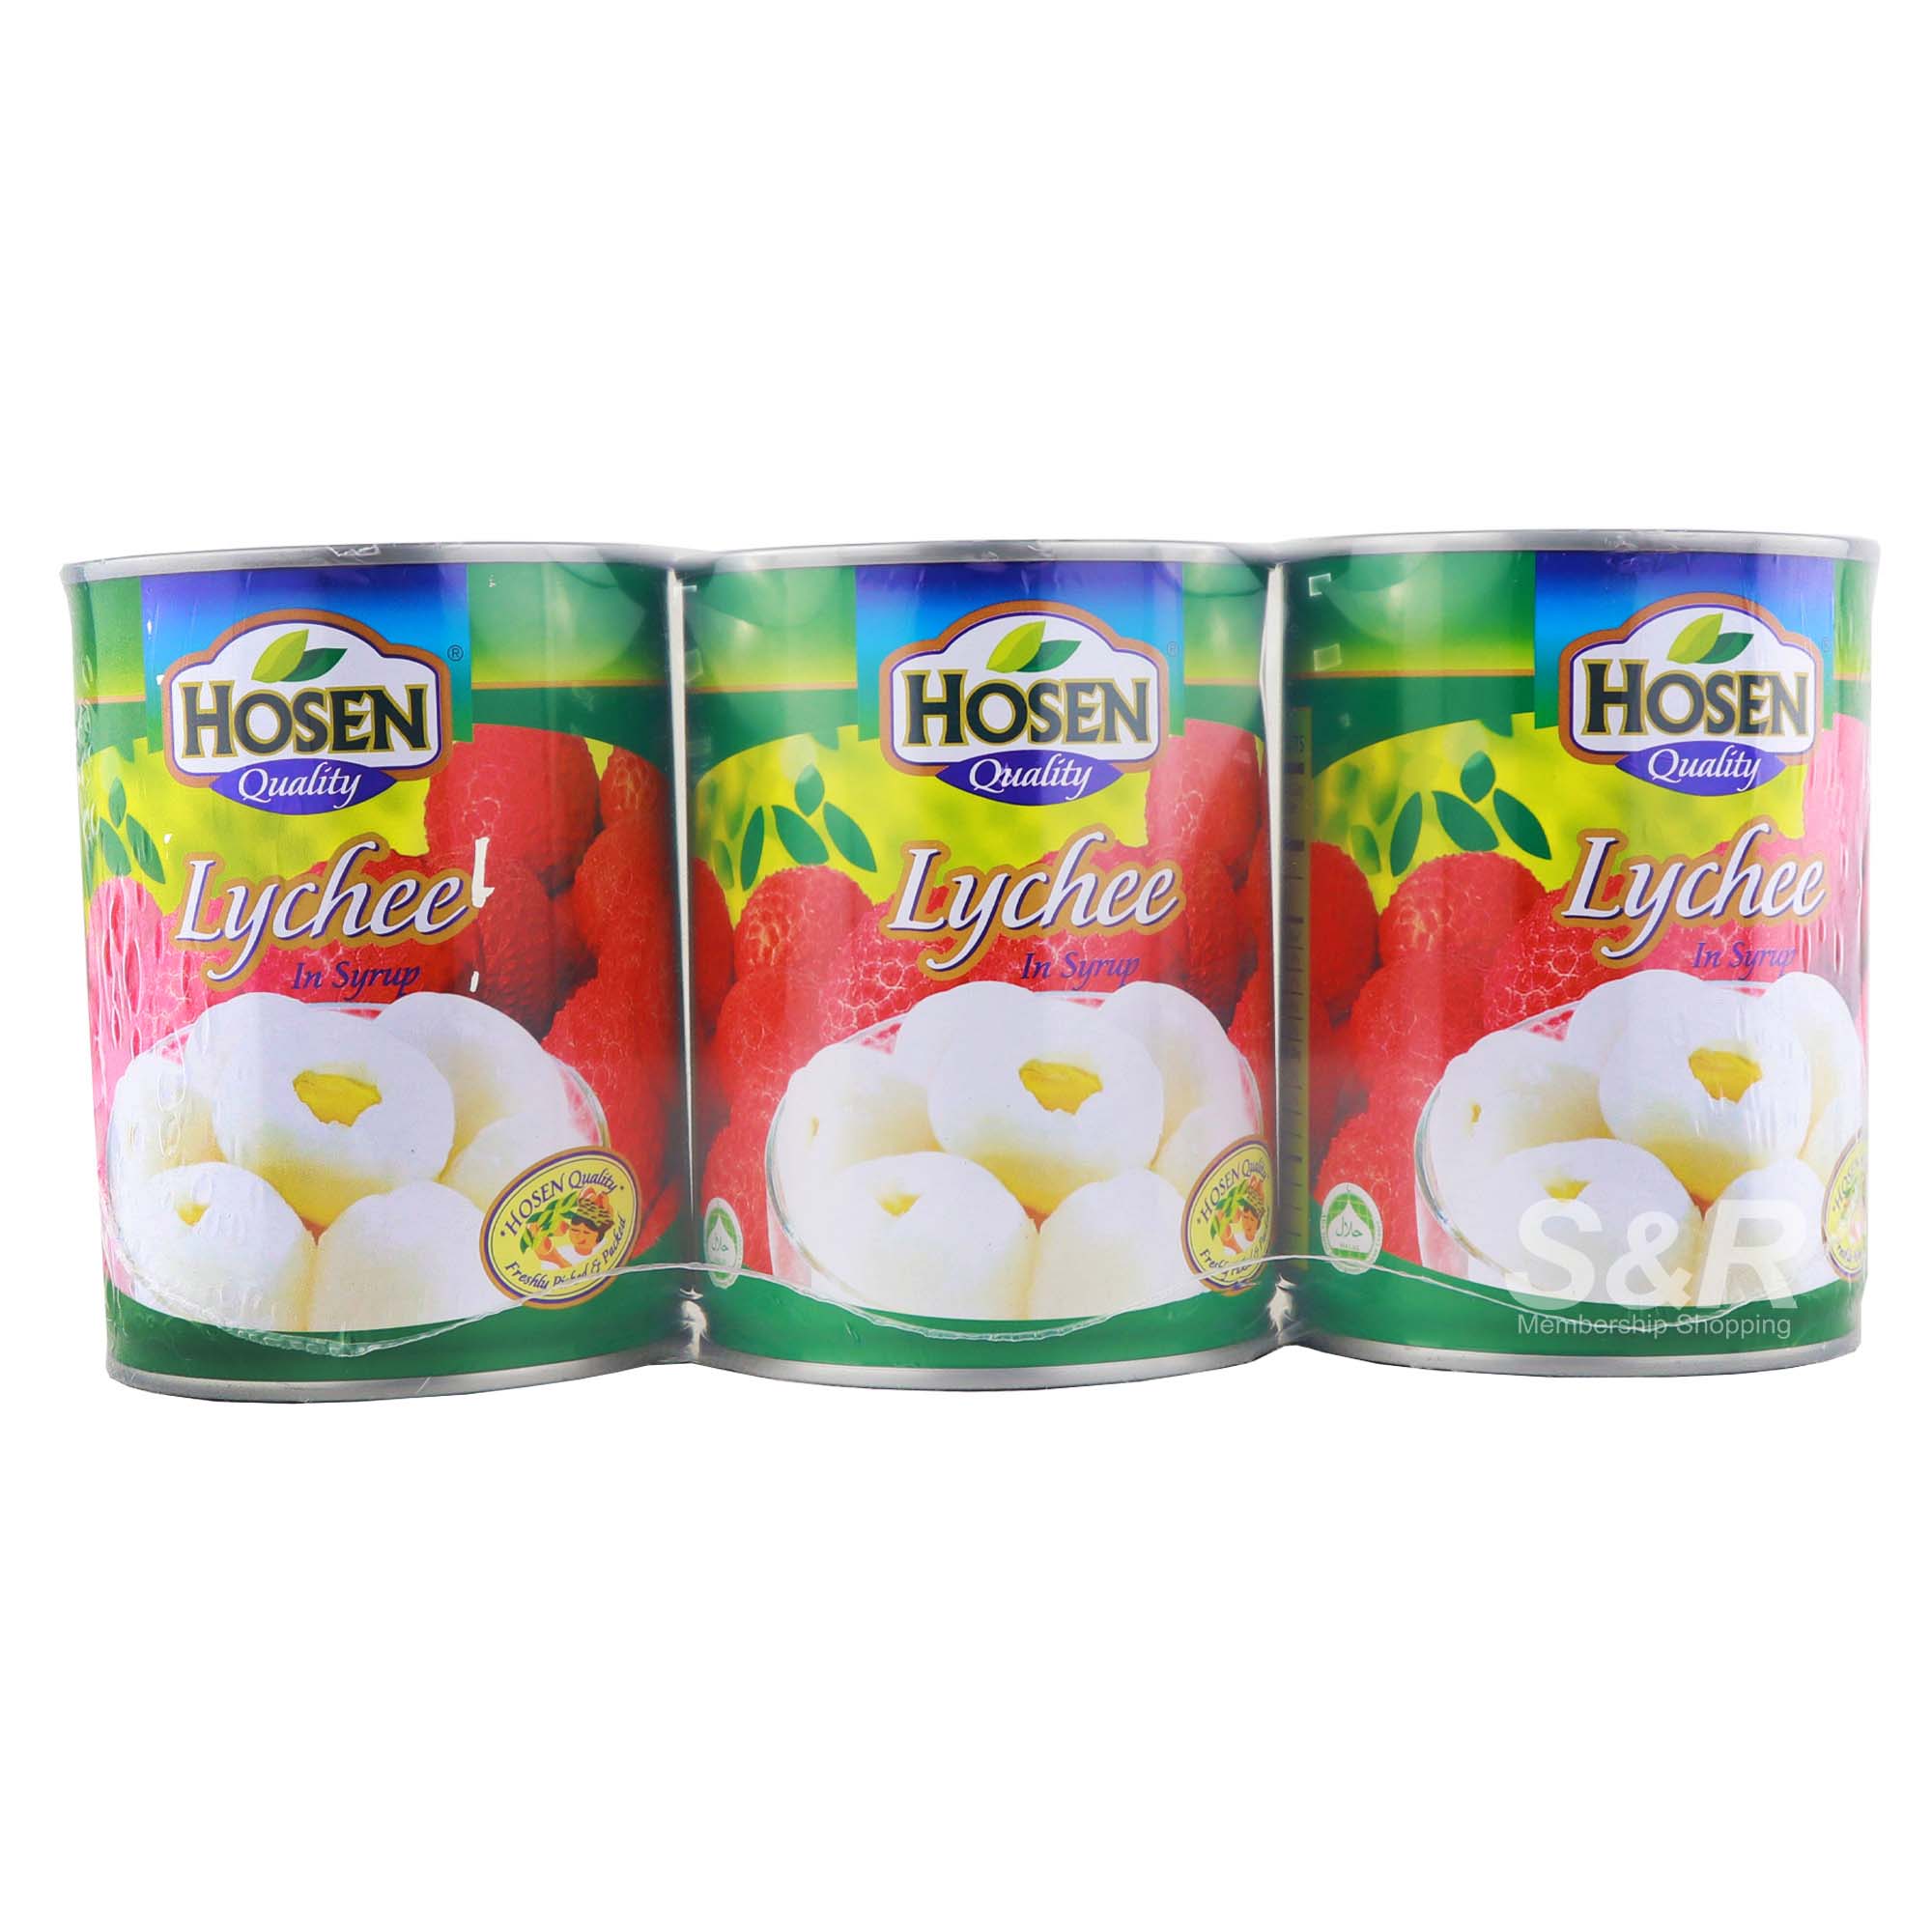 Hosen Quality Lychee in Syrup 3 cans